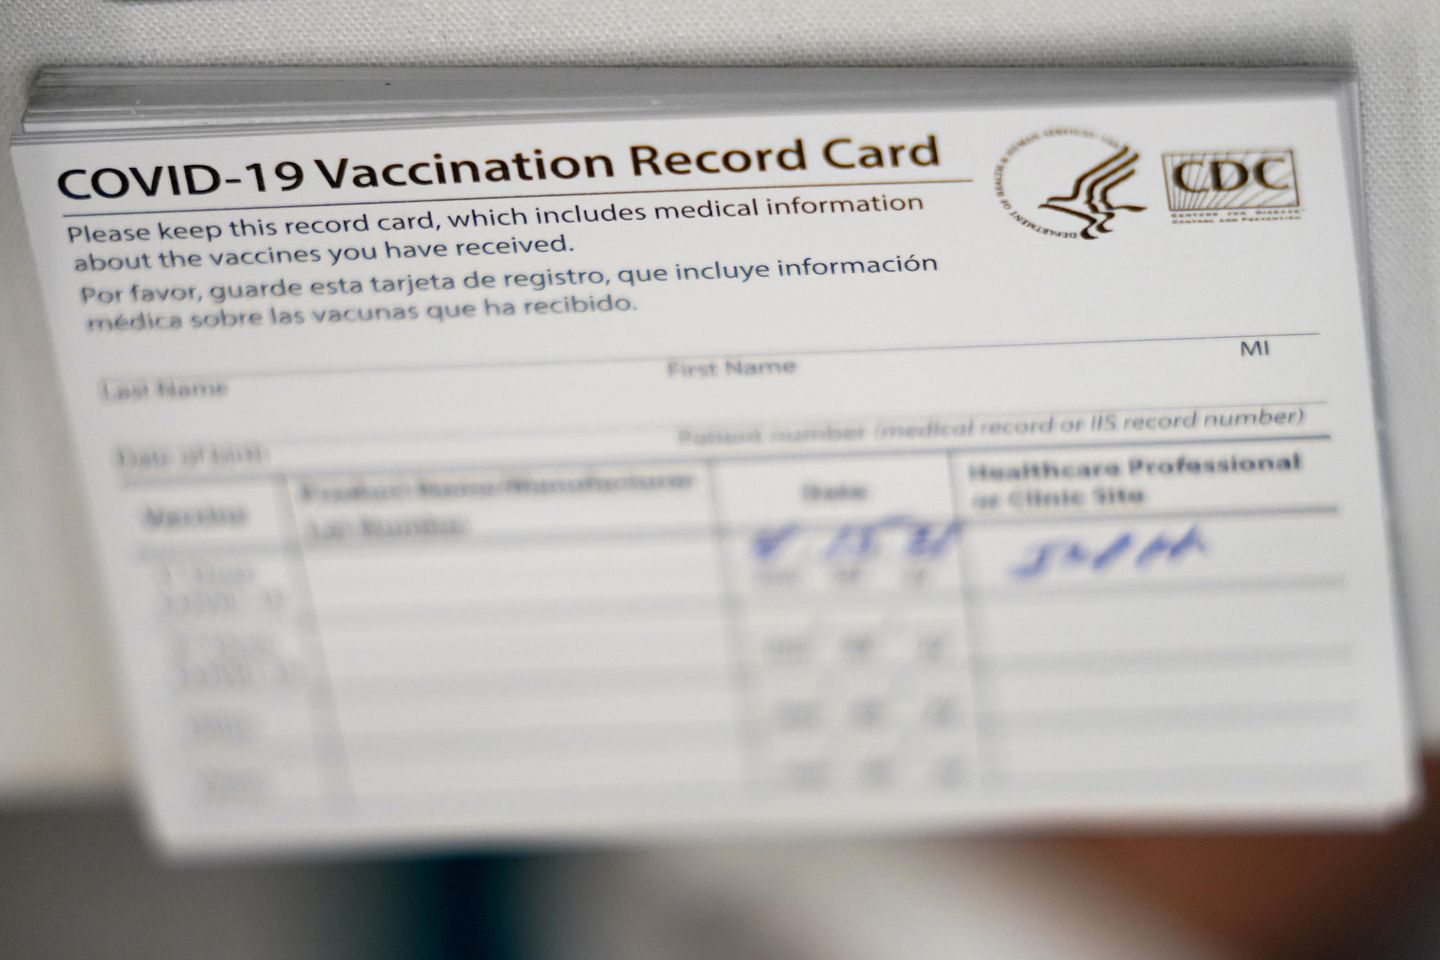 Utah surgeon destroyed vaccines and sold false vaccination cards, DOJ says